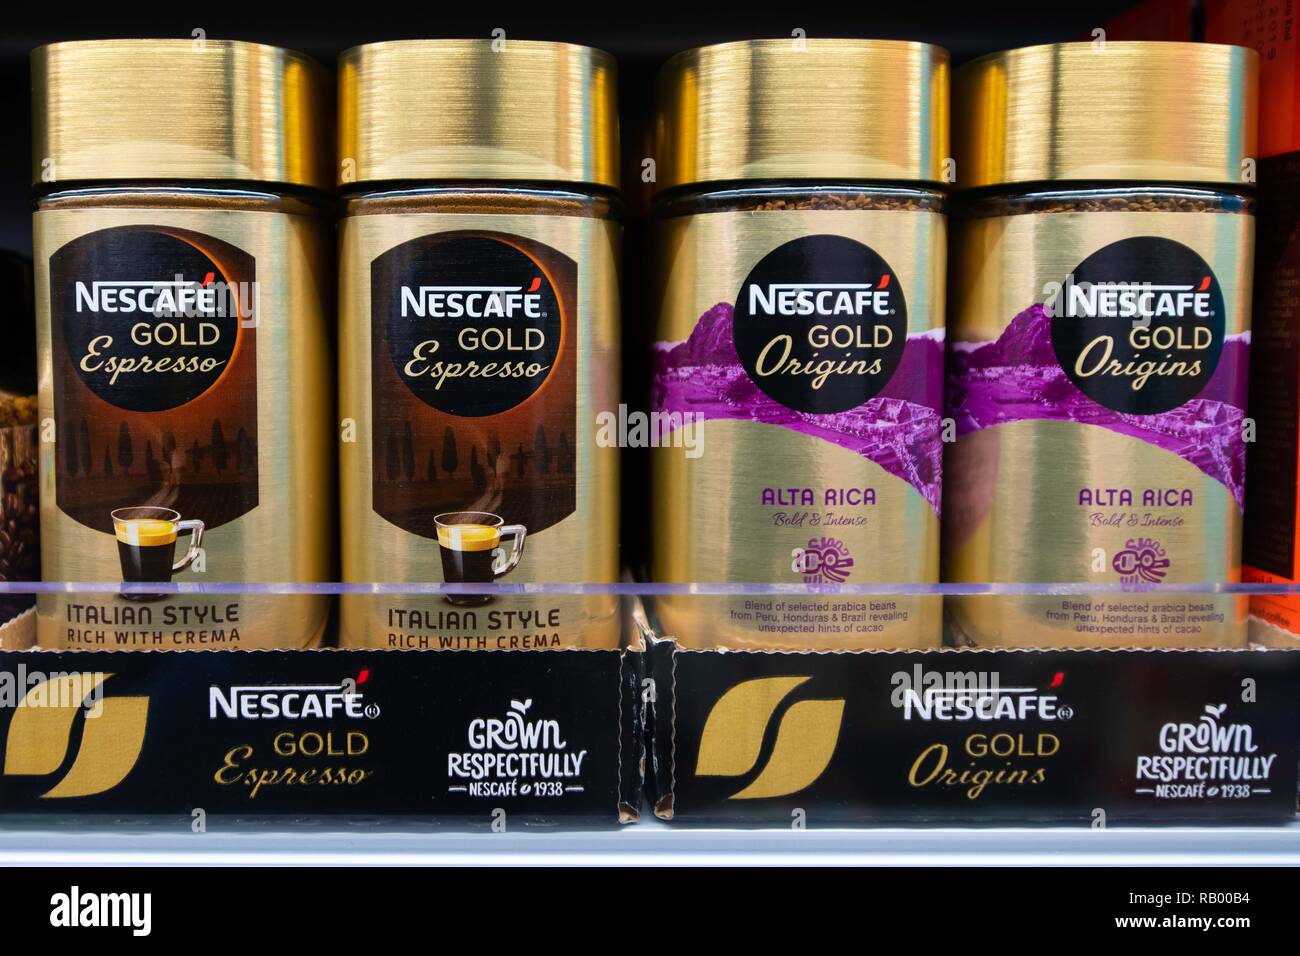 Jars of Nescafe Gold instant coffee on sale in a supermarket shop in the UK. Stock Photo